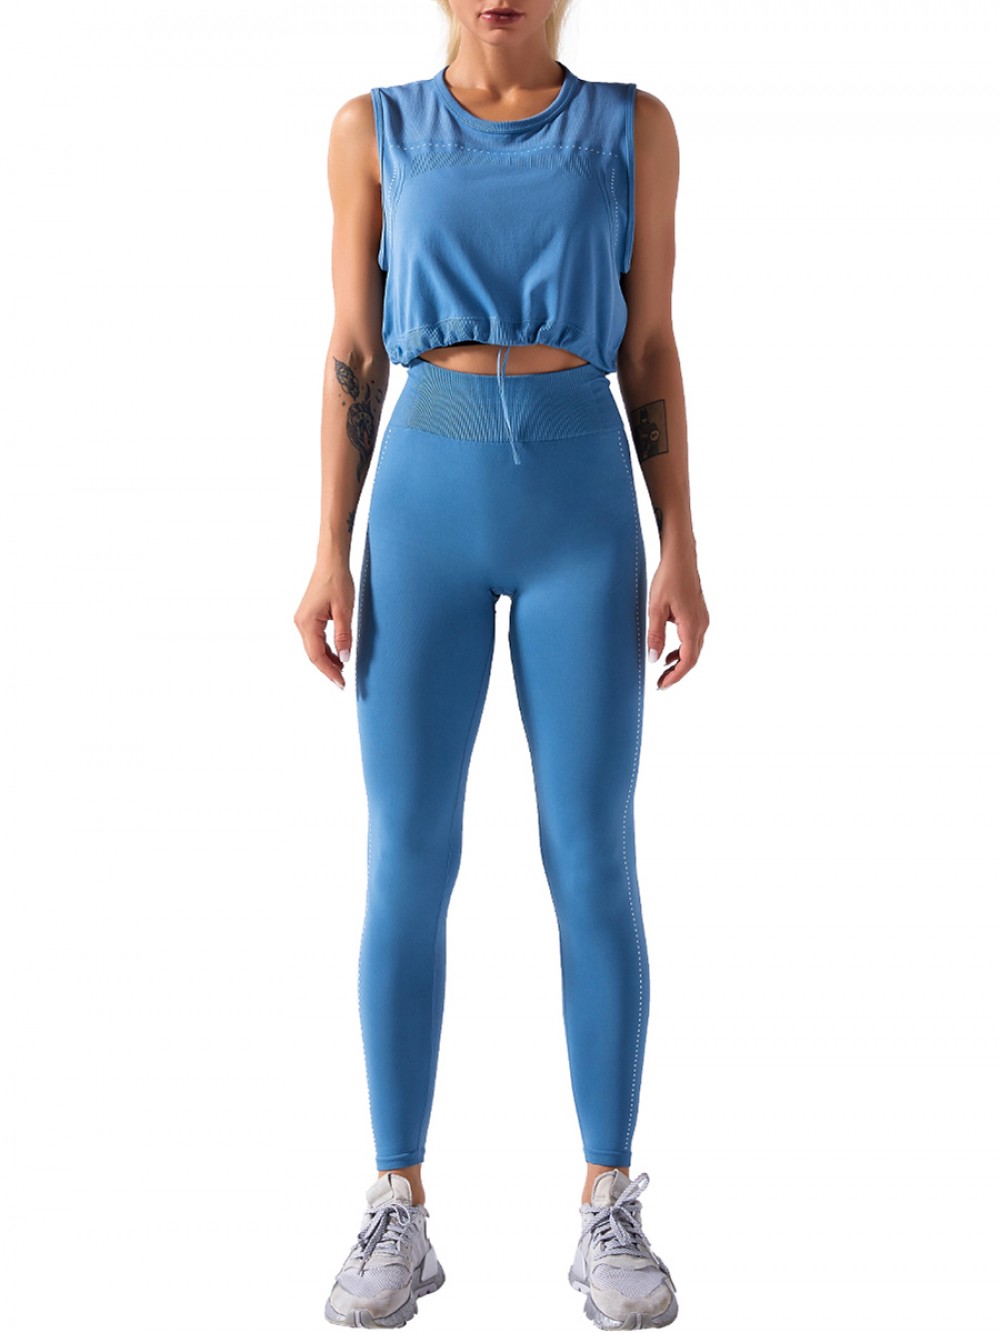 Sky Blue Running Suit Ruched Round Collar Seamless Workout Activewear